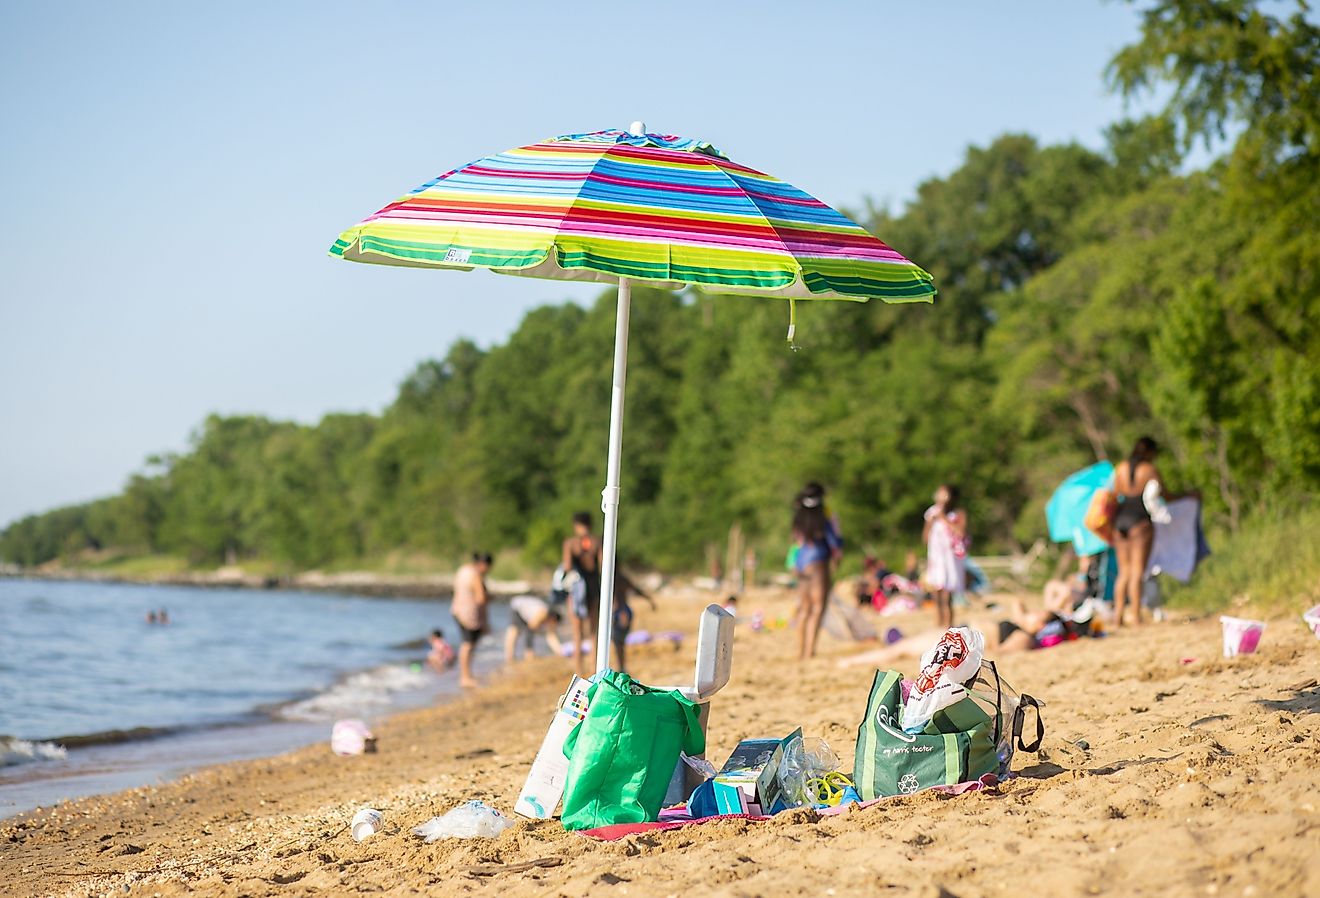 A beach umbrella stands in the sand at Matapeake Clubhouse and Beach on Kent Island, Maryland. Image credit Nicole Glass Photography via Shutterstock. 